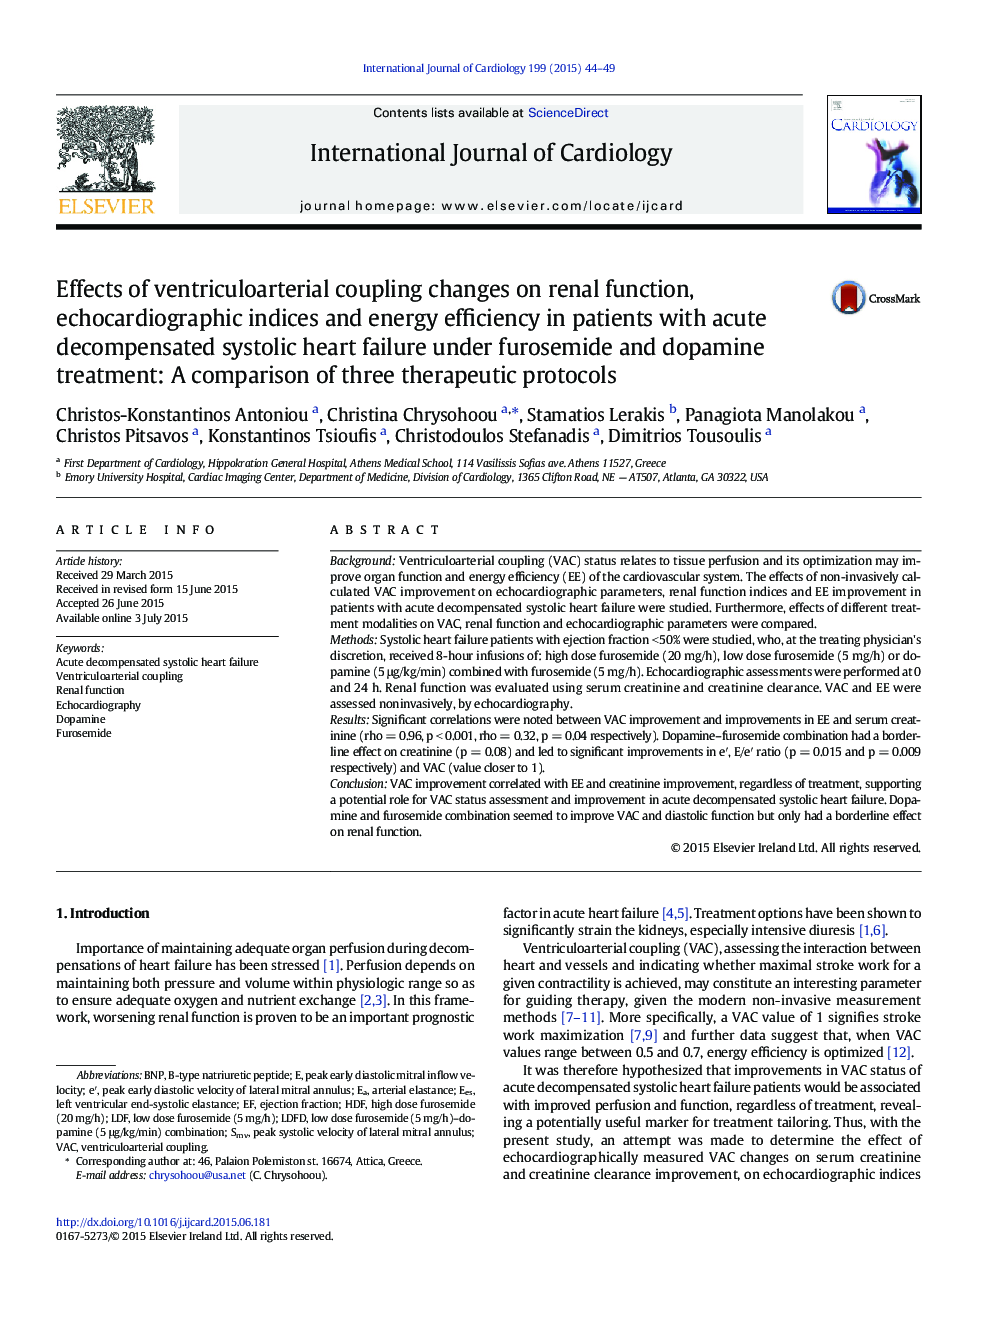 Effects of ventriculoarterial coupling changes on renal function, echocardiographic indices and energy efficiency in patients with acute decompensated systolic heart failure under furosemide and dopamine treatment: A comparison of three therapeutic protoc